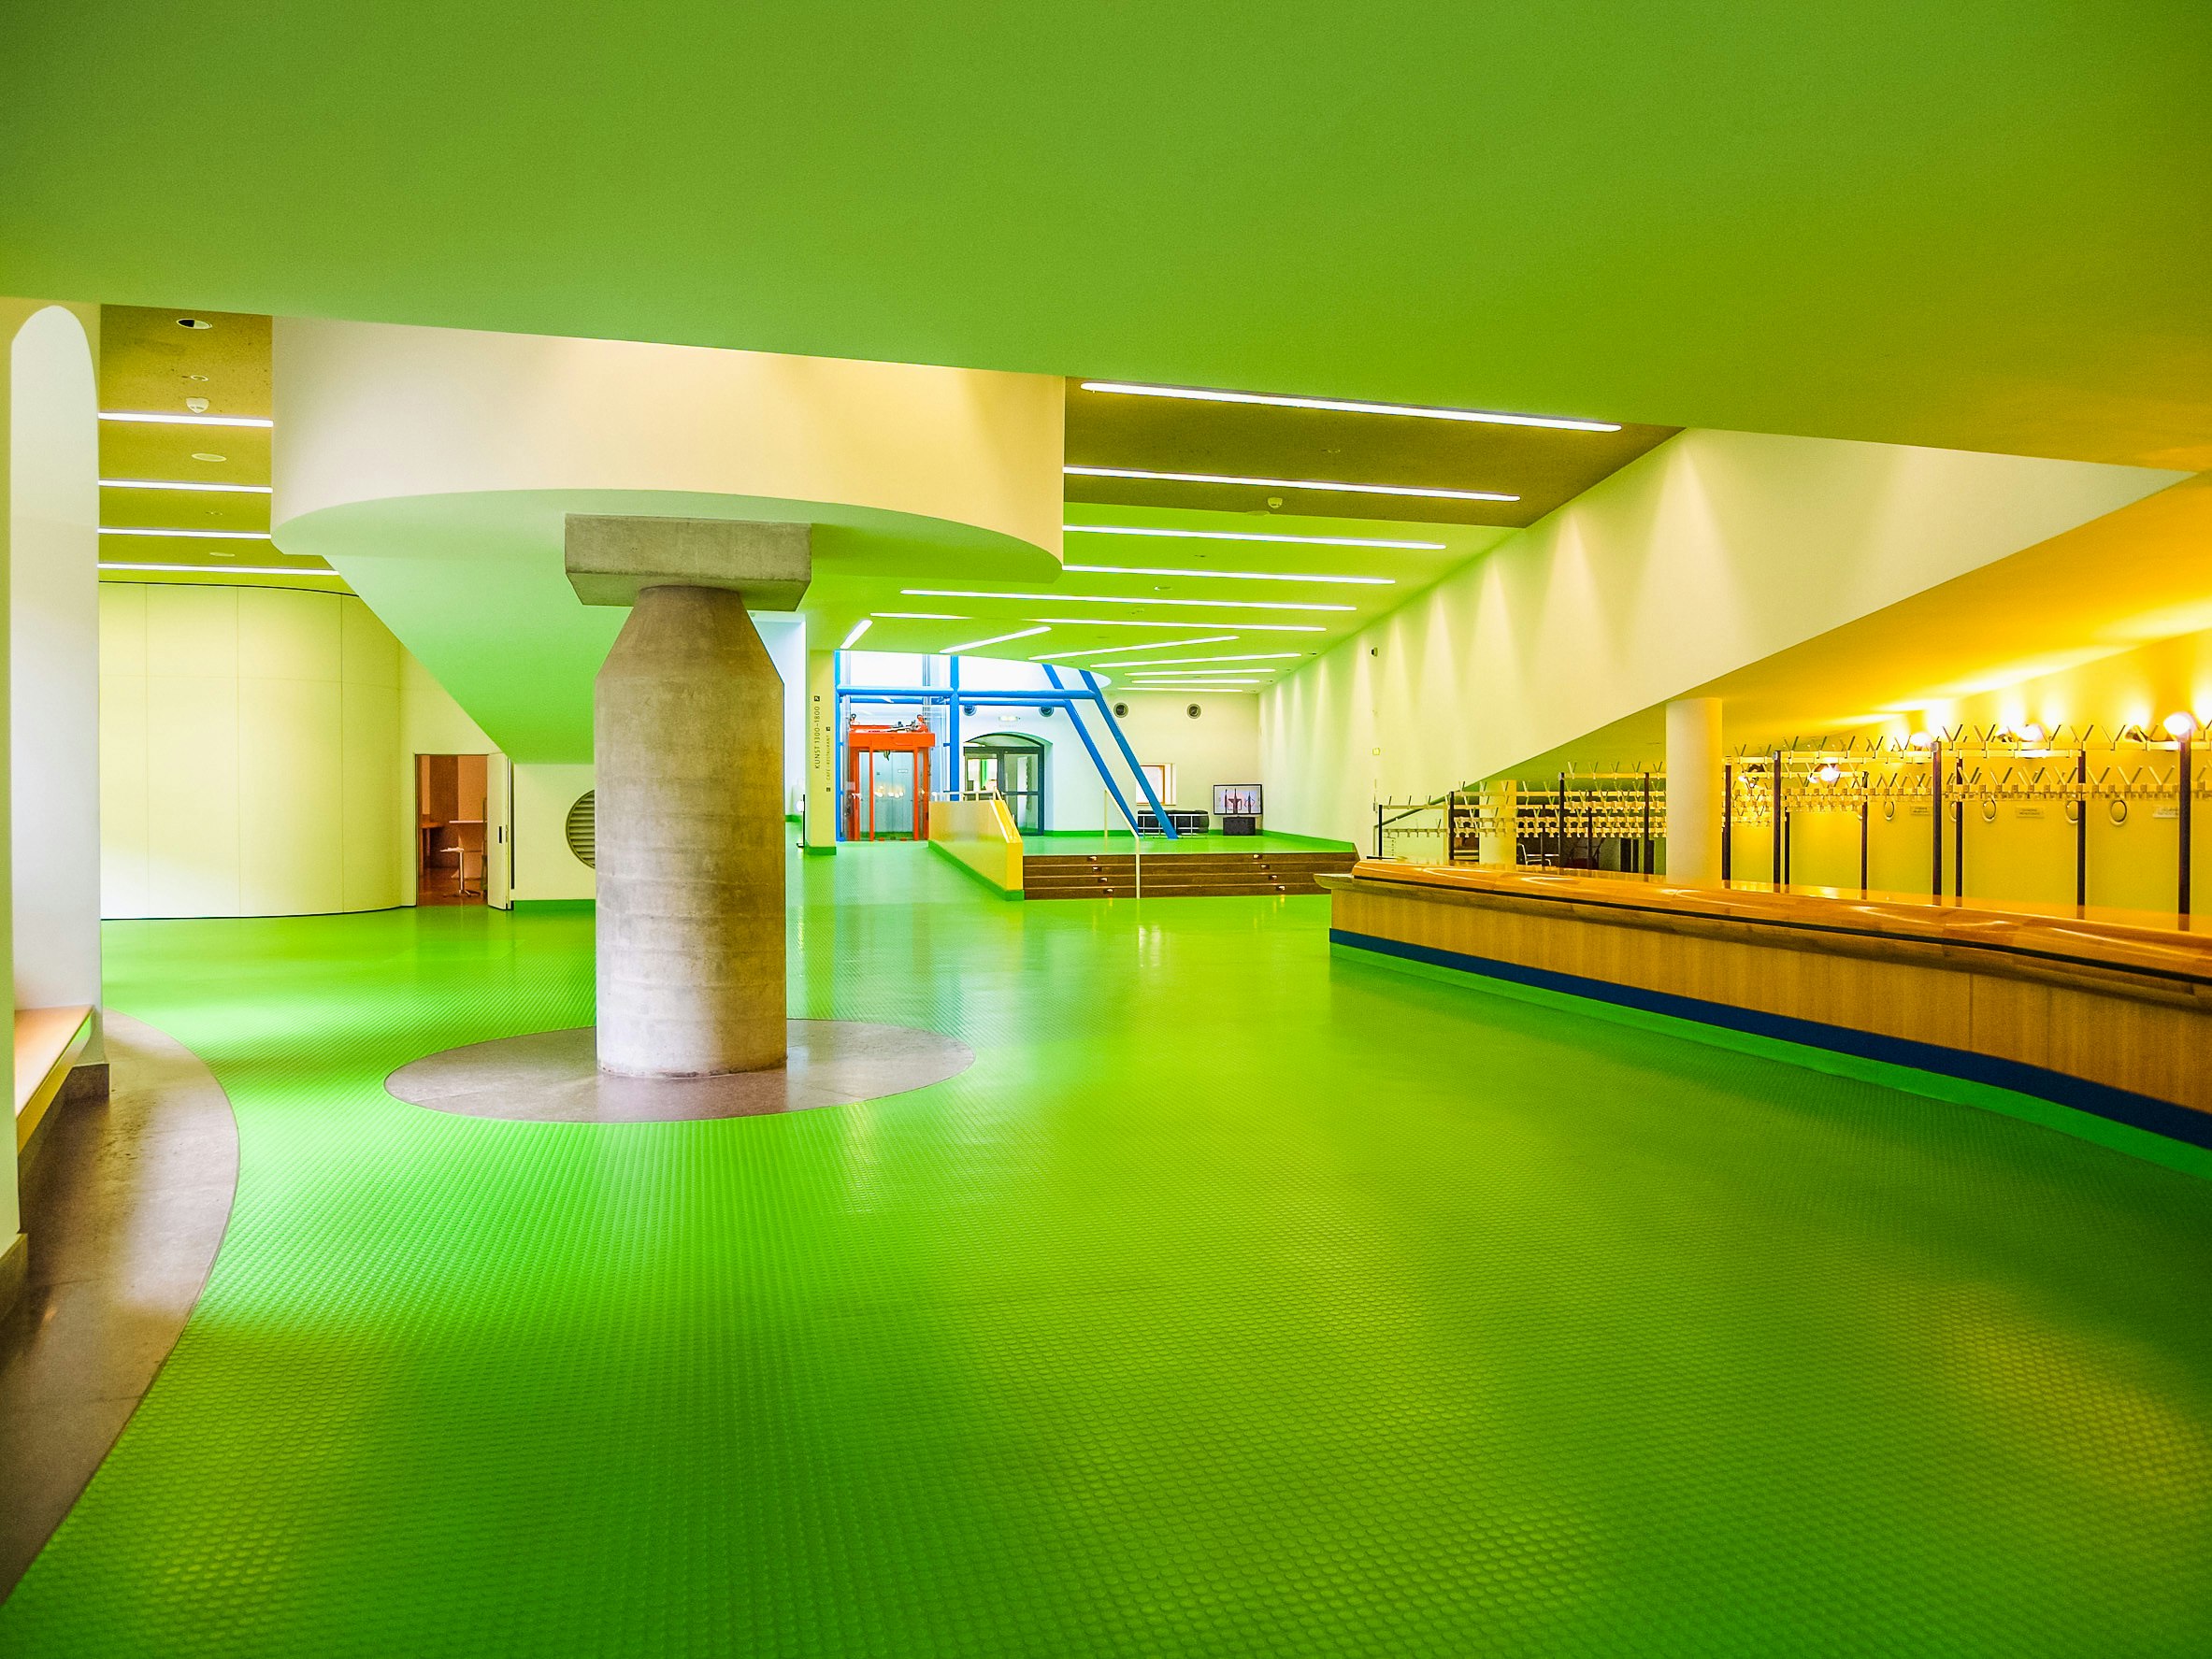 A shot of the inside of the Staatsgalerie, Stuttgart, Germany. The floor is green and support beam is visible in the middle of the photo.